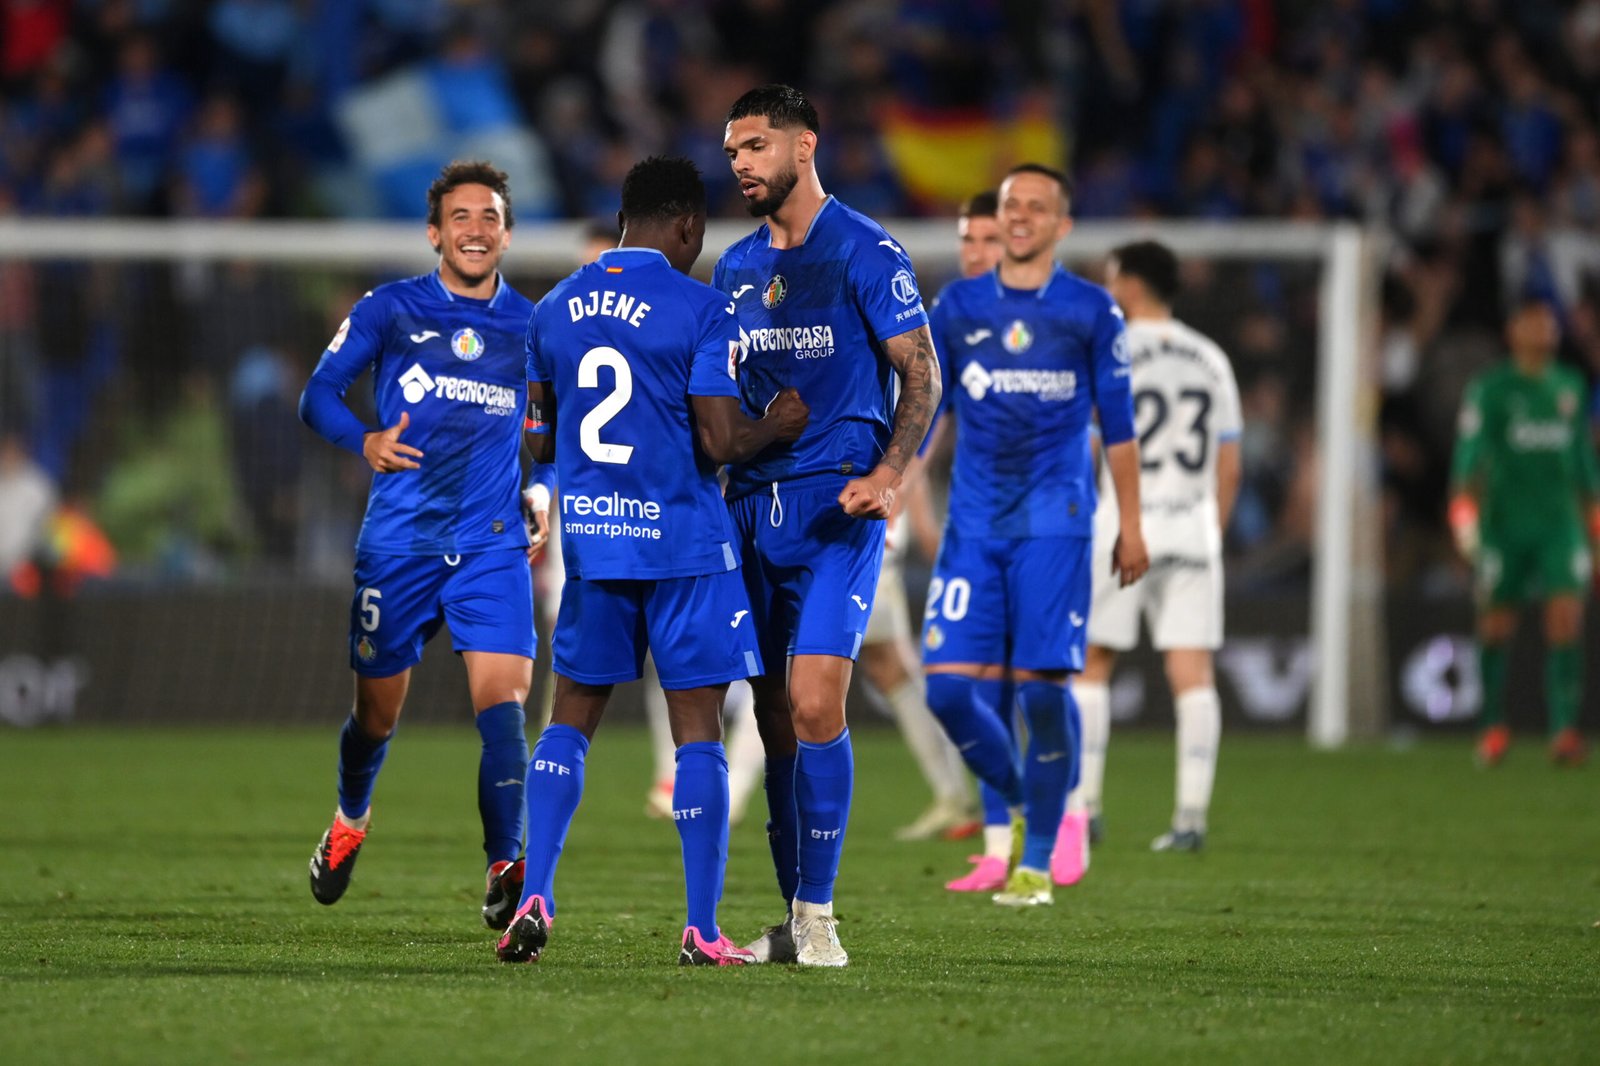 GETAFE, SPAIN - MARCH 16: Dakonam Djene and Omar Alderete of Getafe CF celebrates following the team's victory in the LaLiga EA Sports match between Getafe CF and Girona FC at Coliseum Alfonso Perez on March 16, 2024 in Getafe, Spain. (Photo by Denis Doyle/Getty Images)